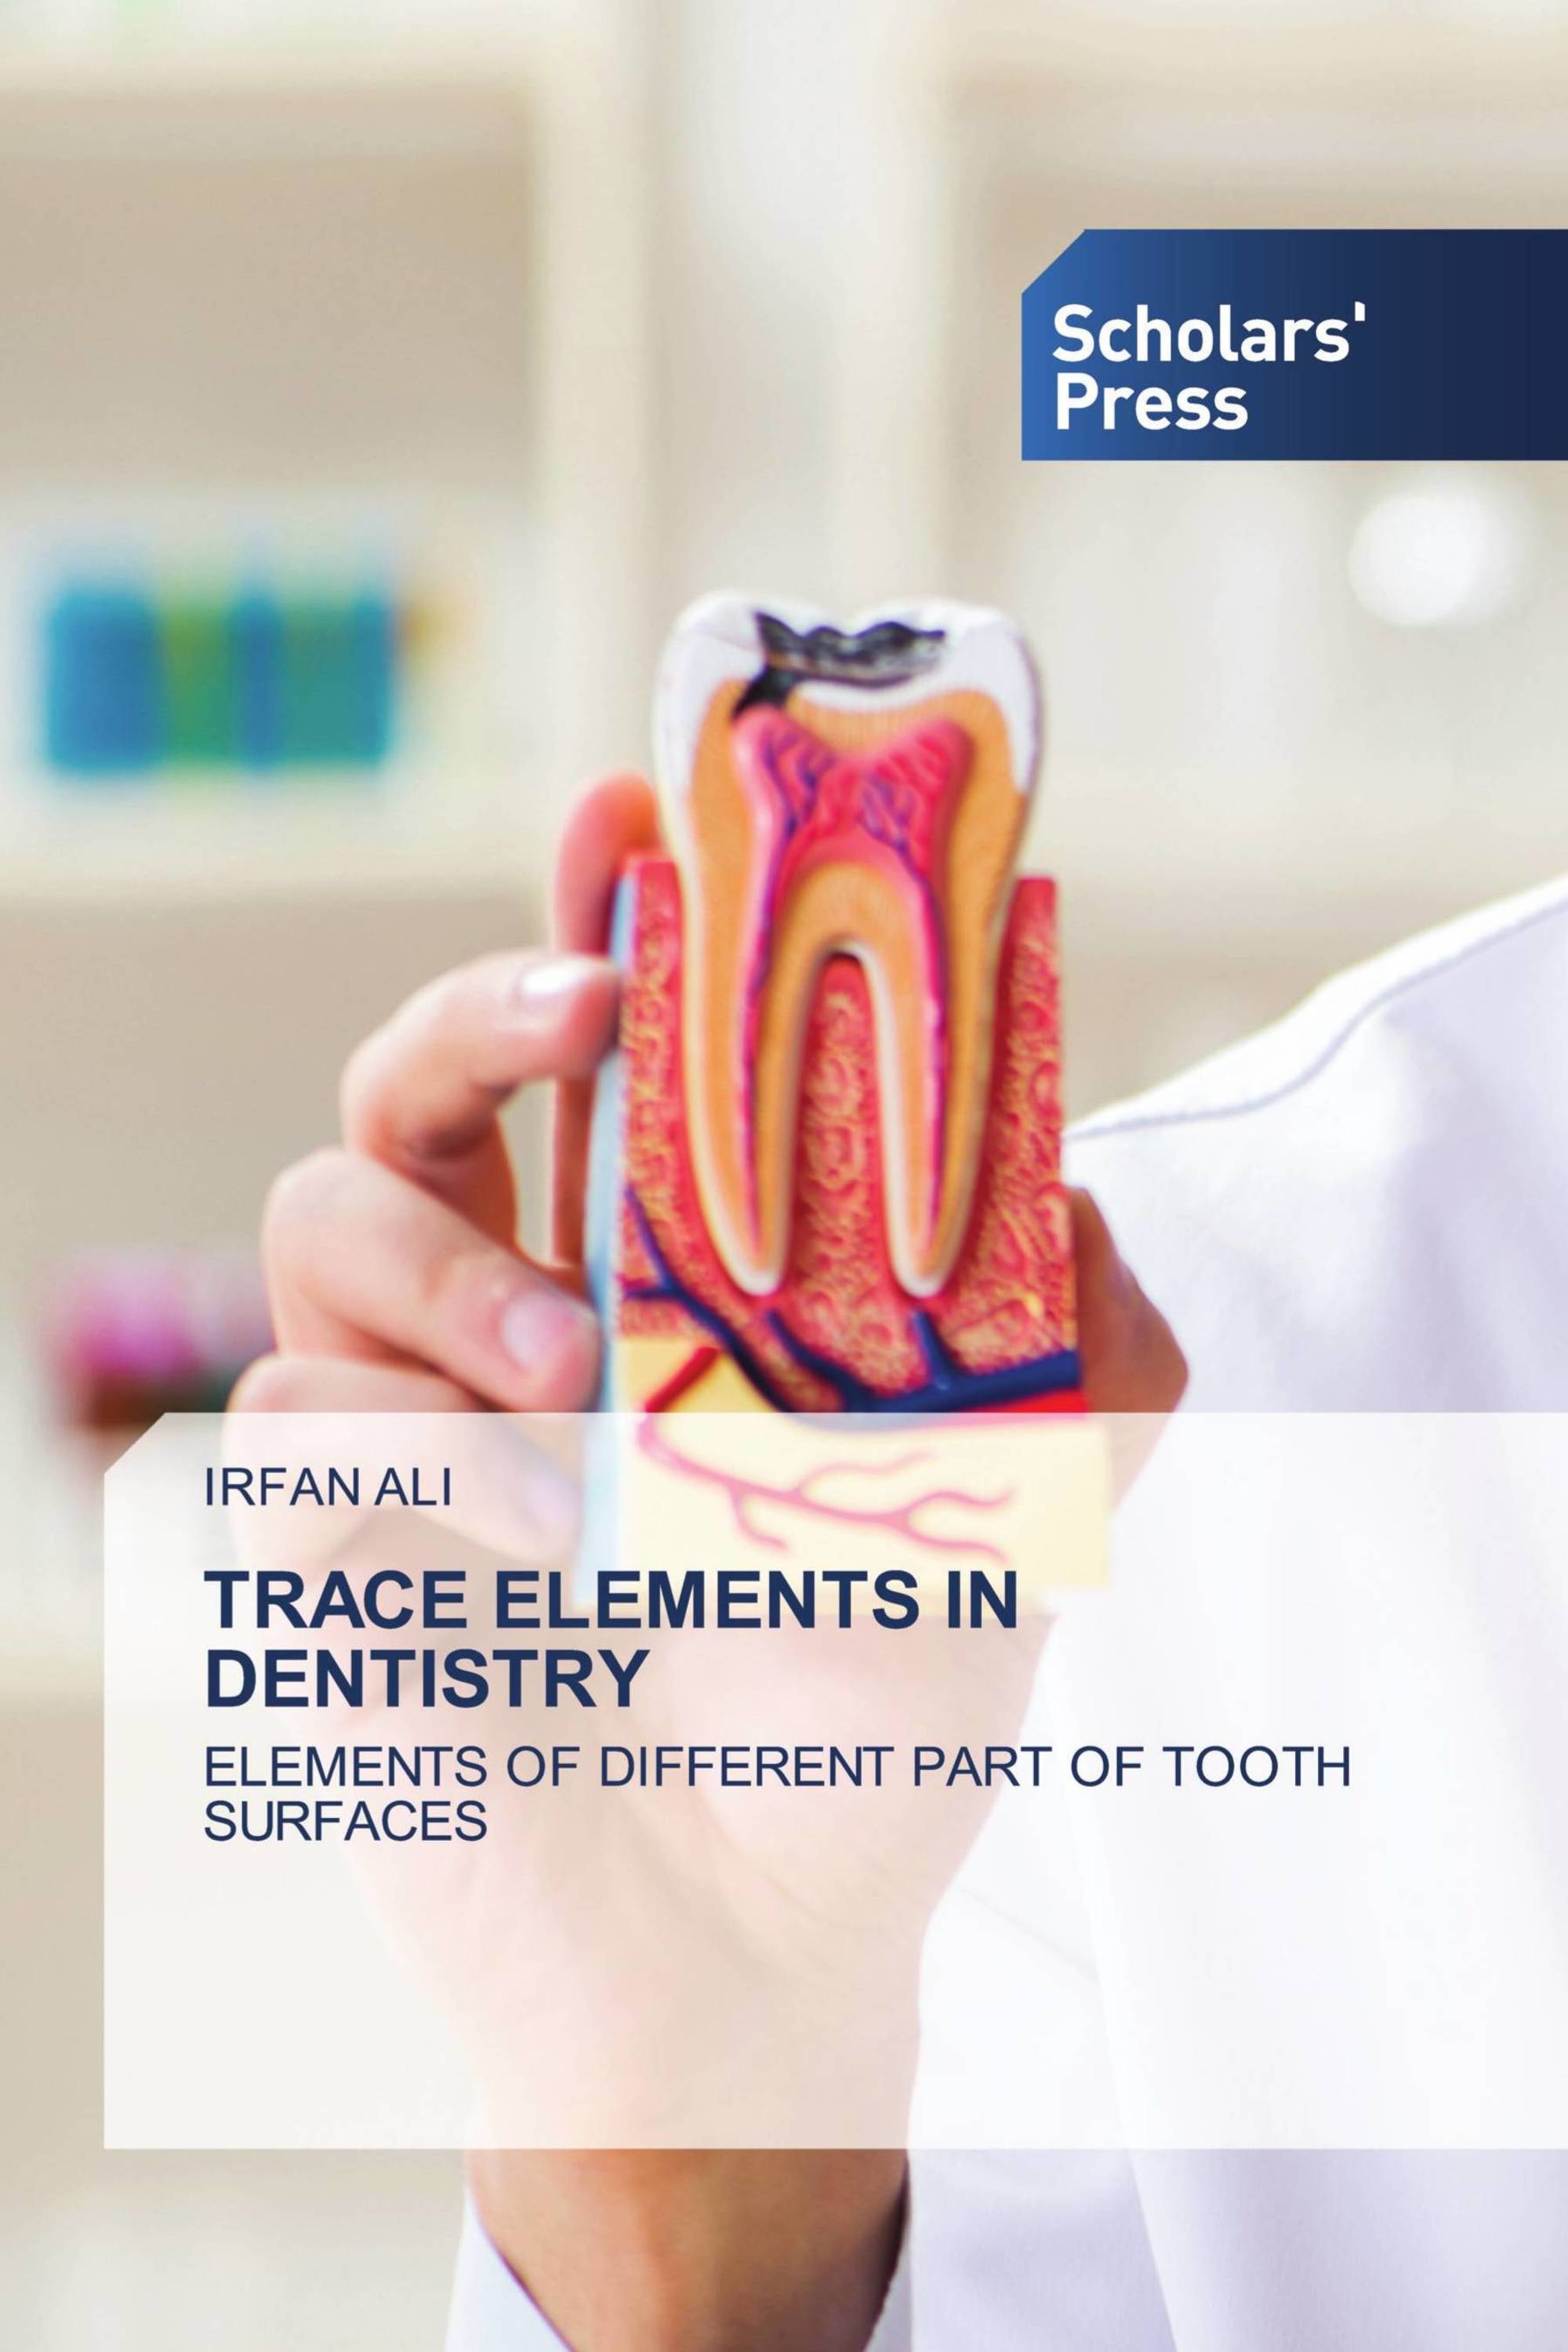 TRACE ELEMENTS IN DENTISTRY